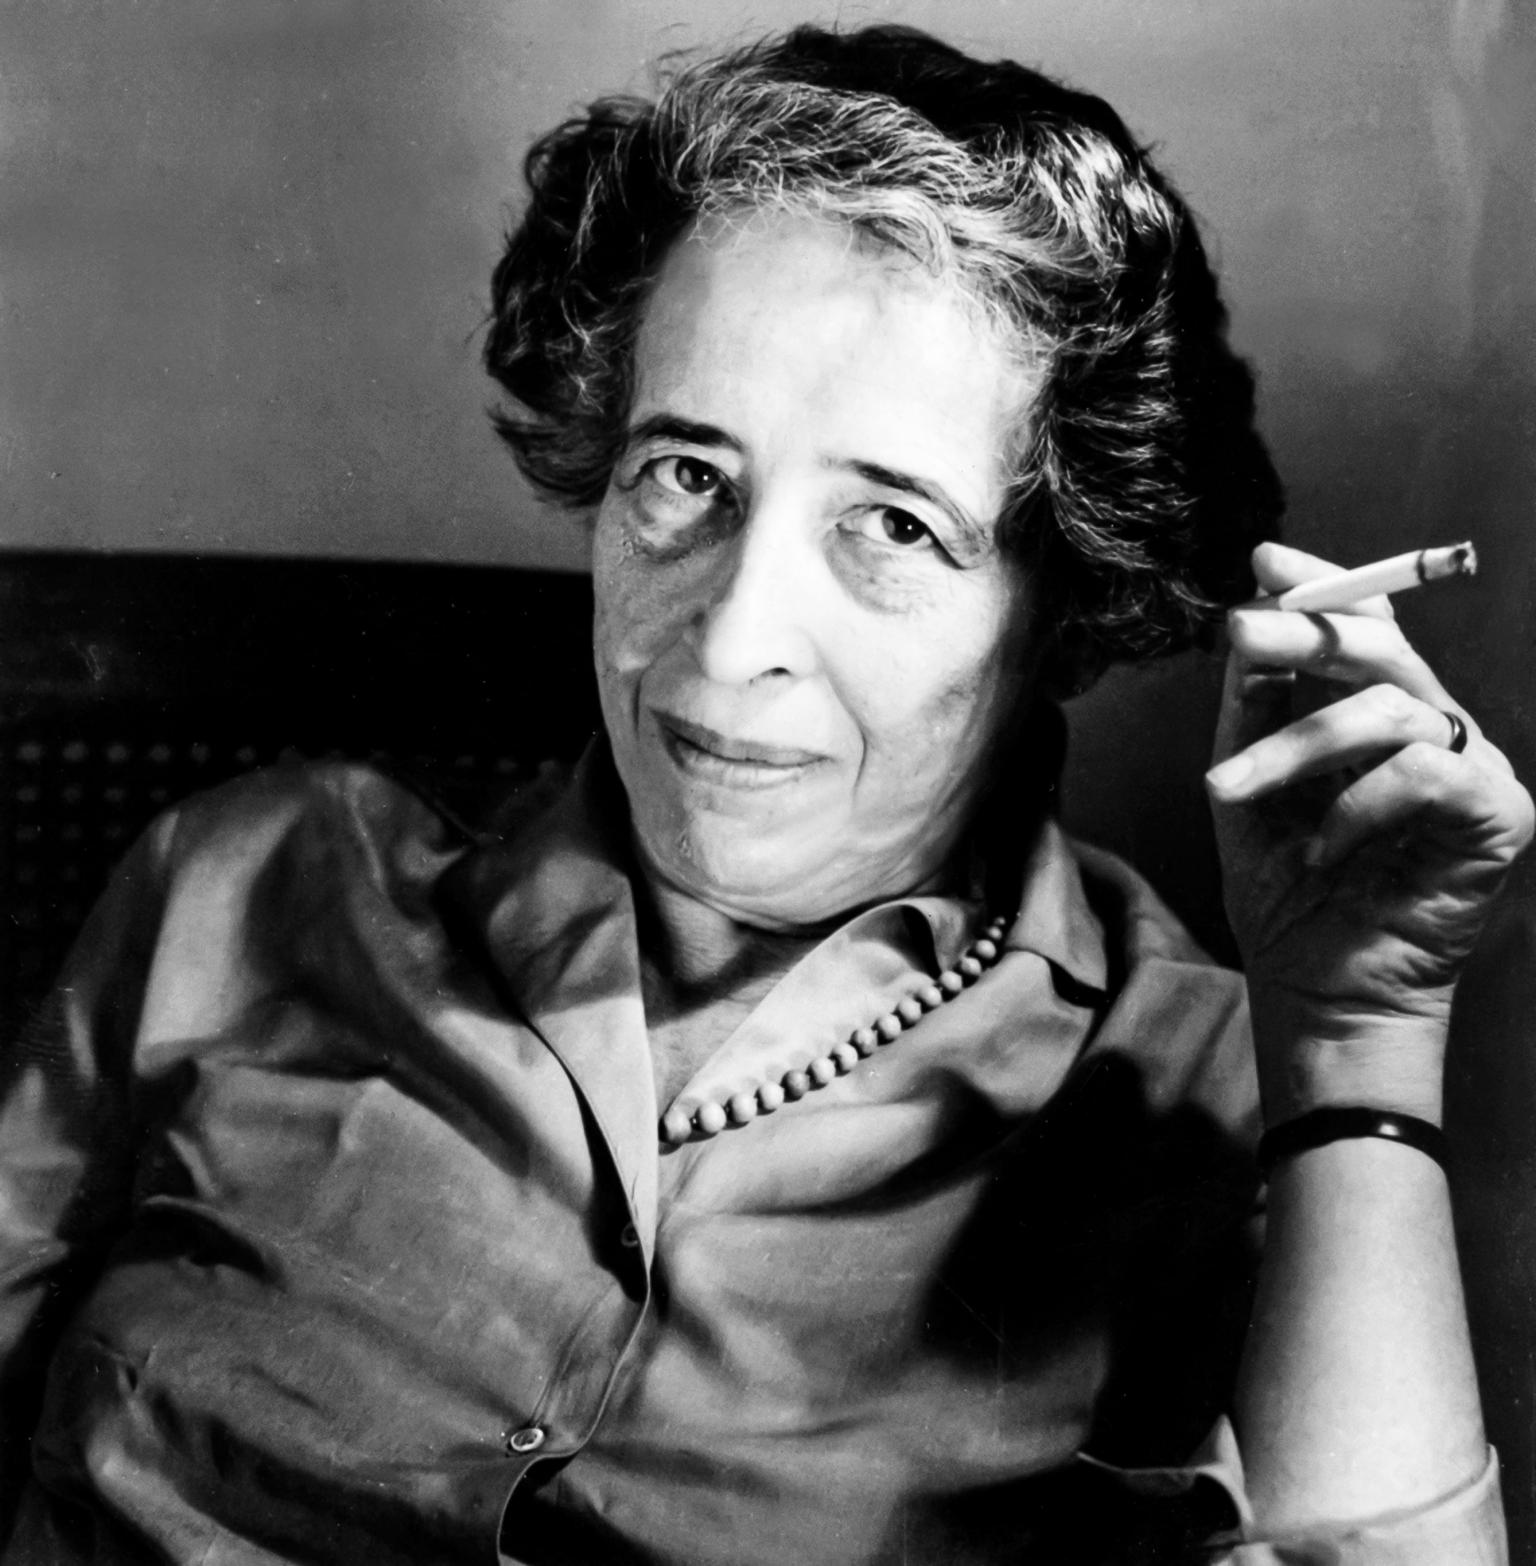 Portrait photograph of a woman looking at the camera and holding up a cigarette in her left hand.